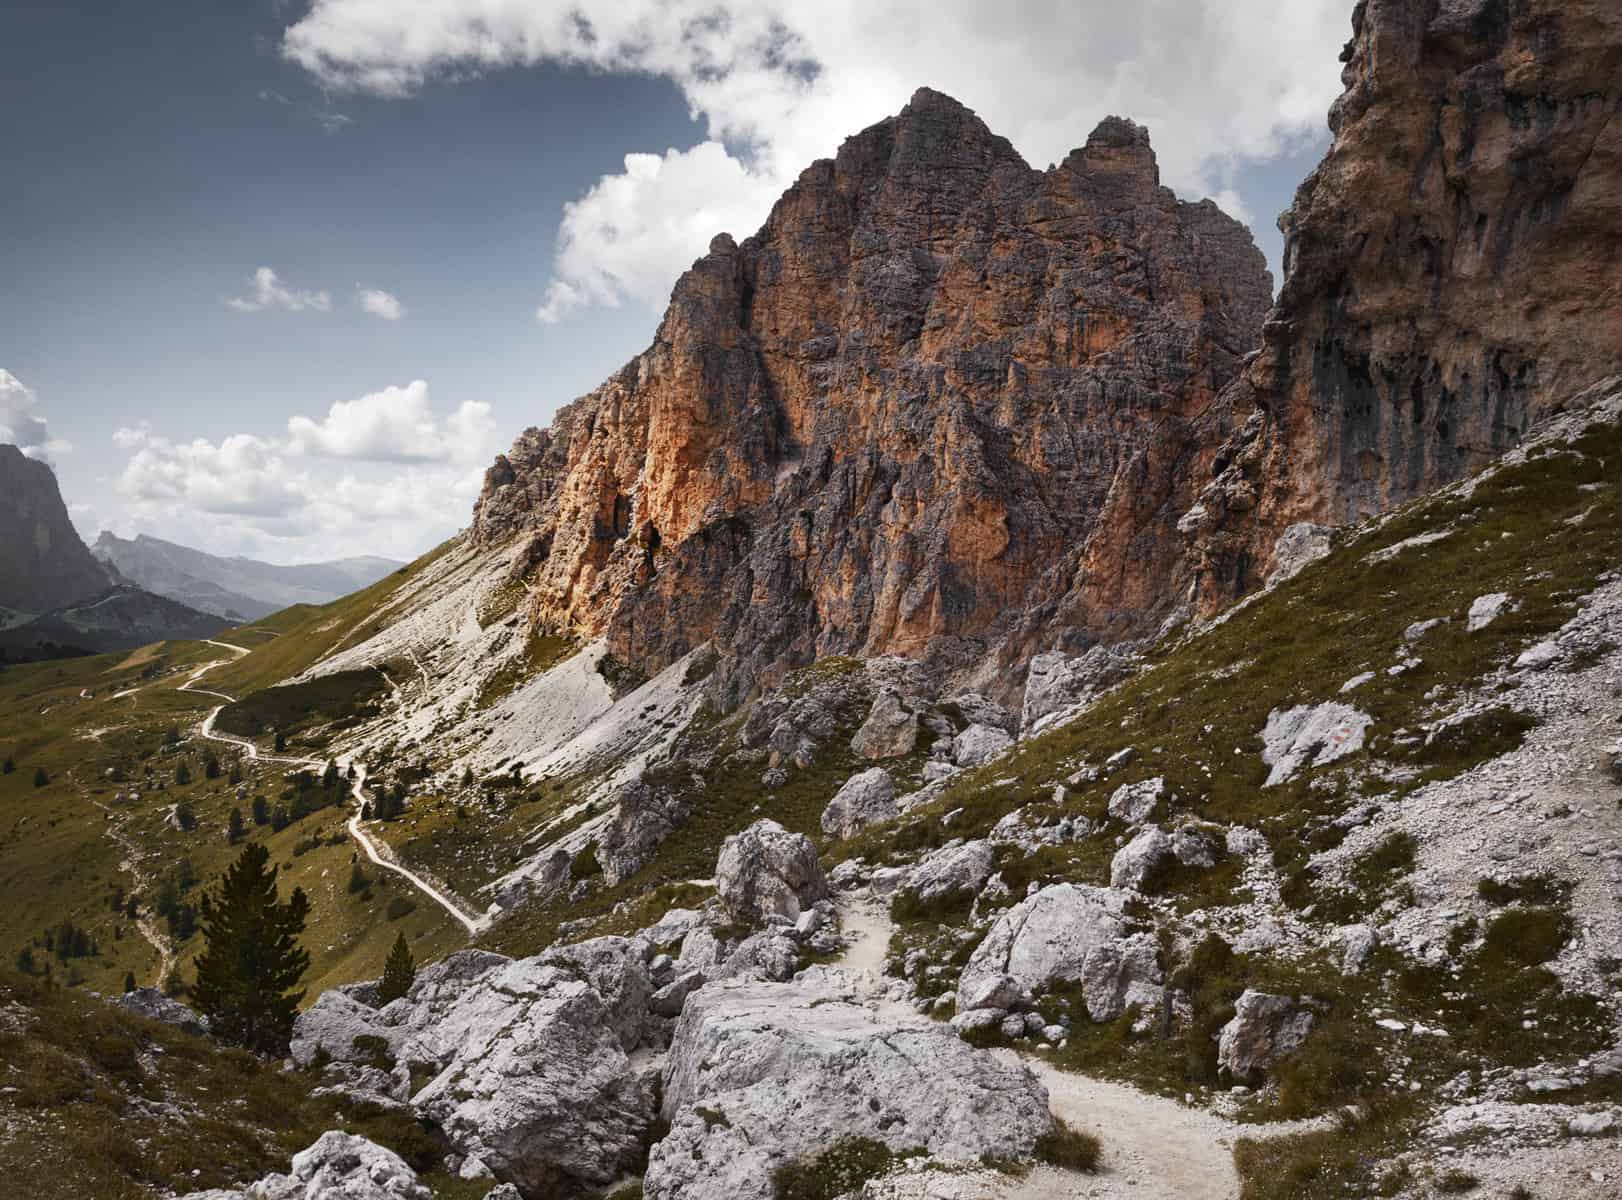 Hiking in The Italian Dolomites - Our guide to alternative hikes away from the tourist trails